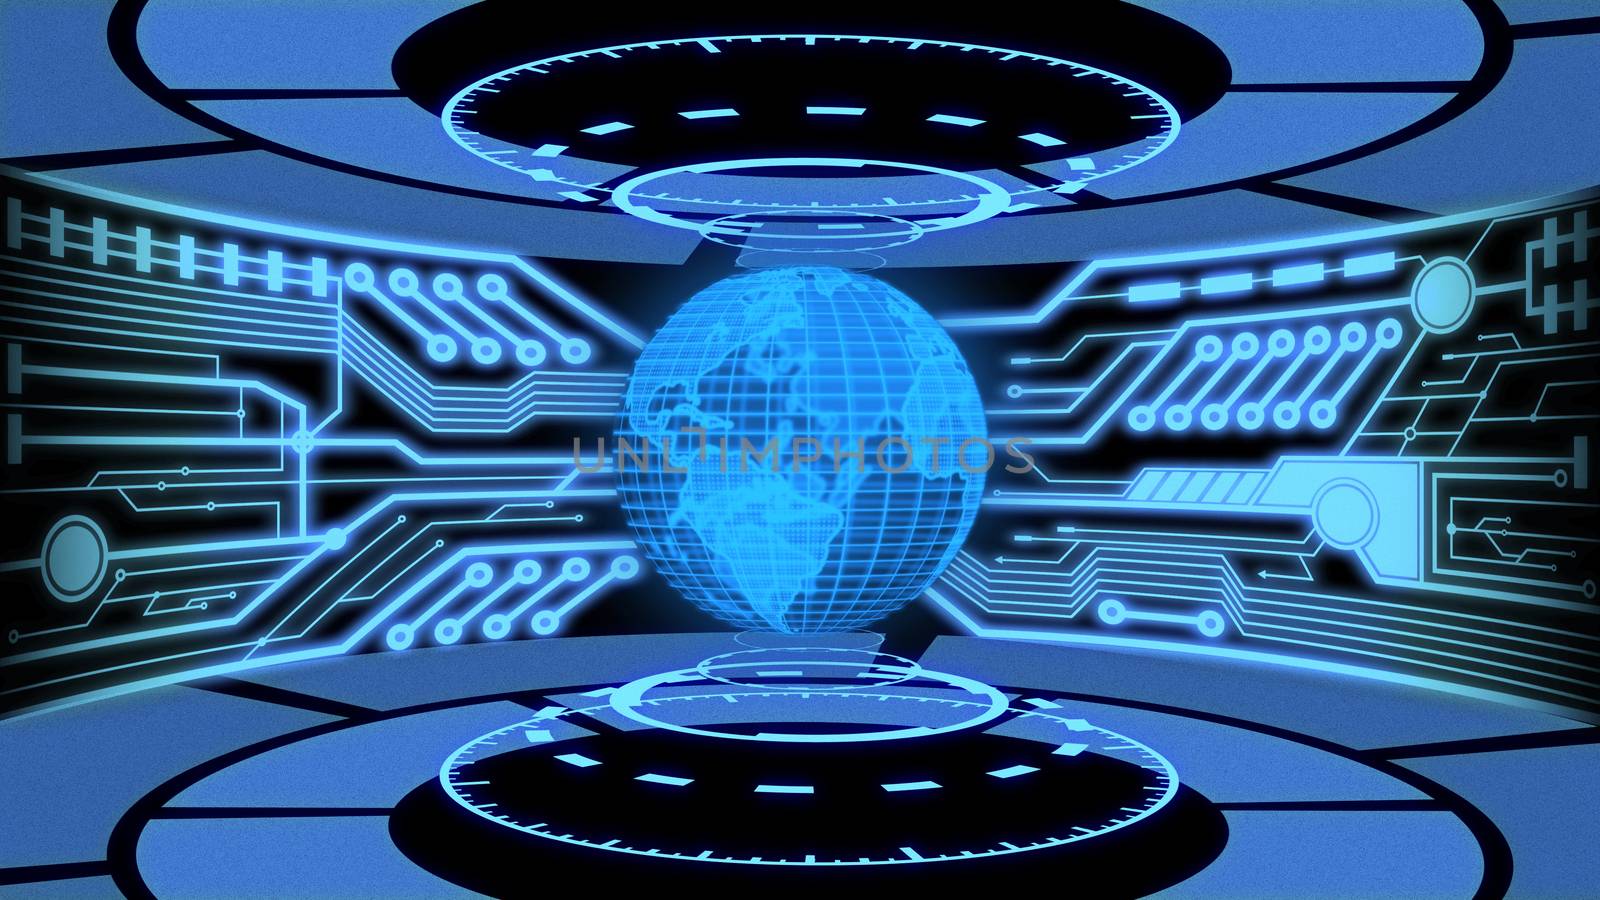 3D Digital Earth and Digital circuit in Blue Color theme laboratory background